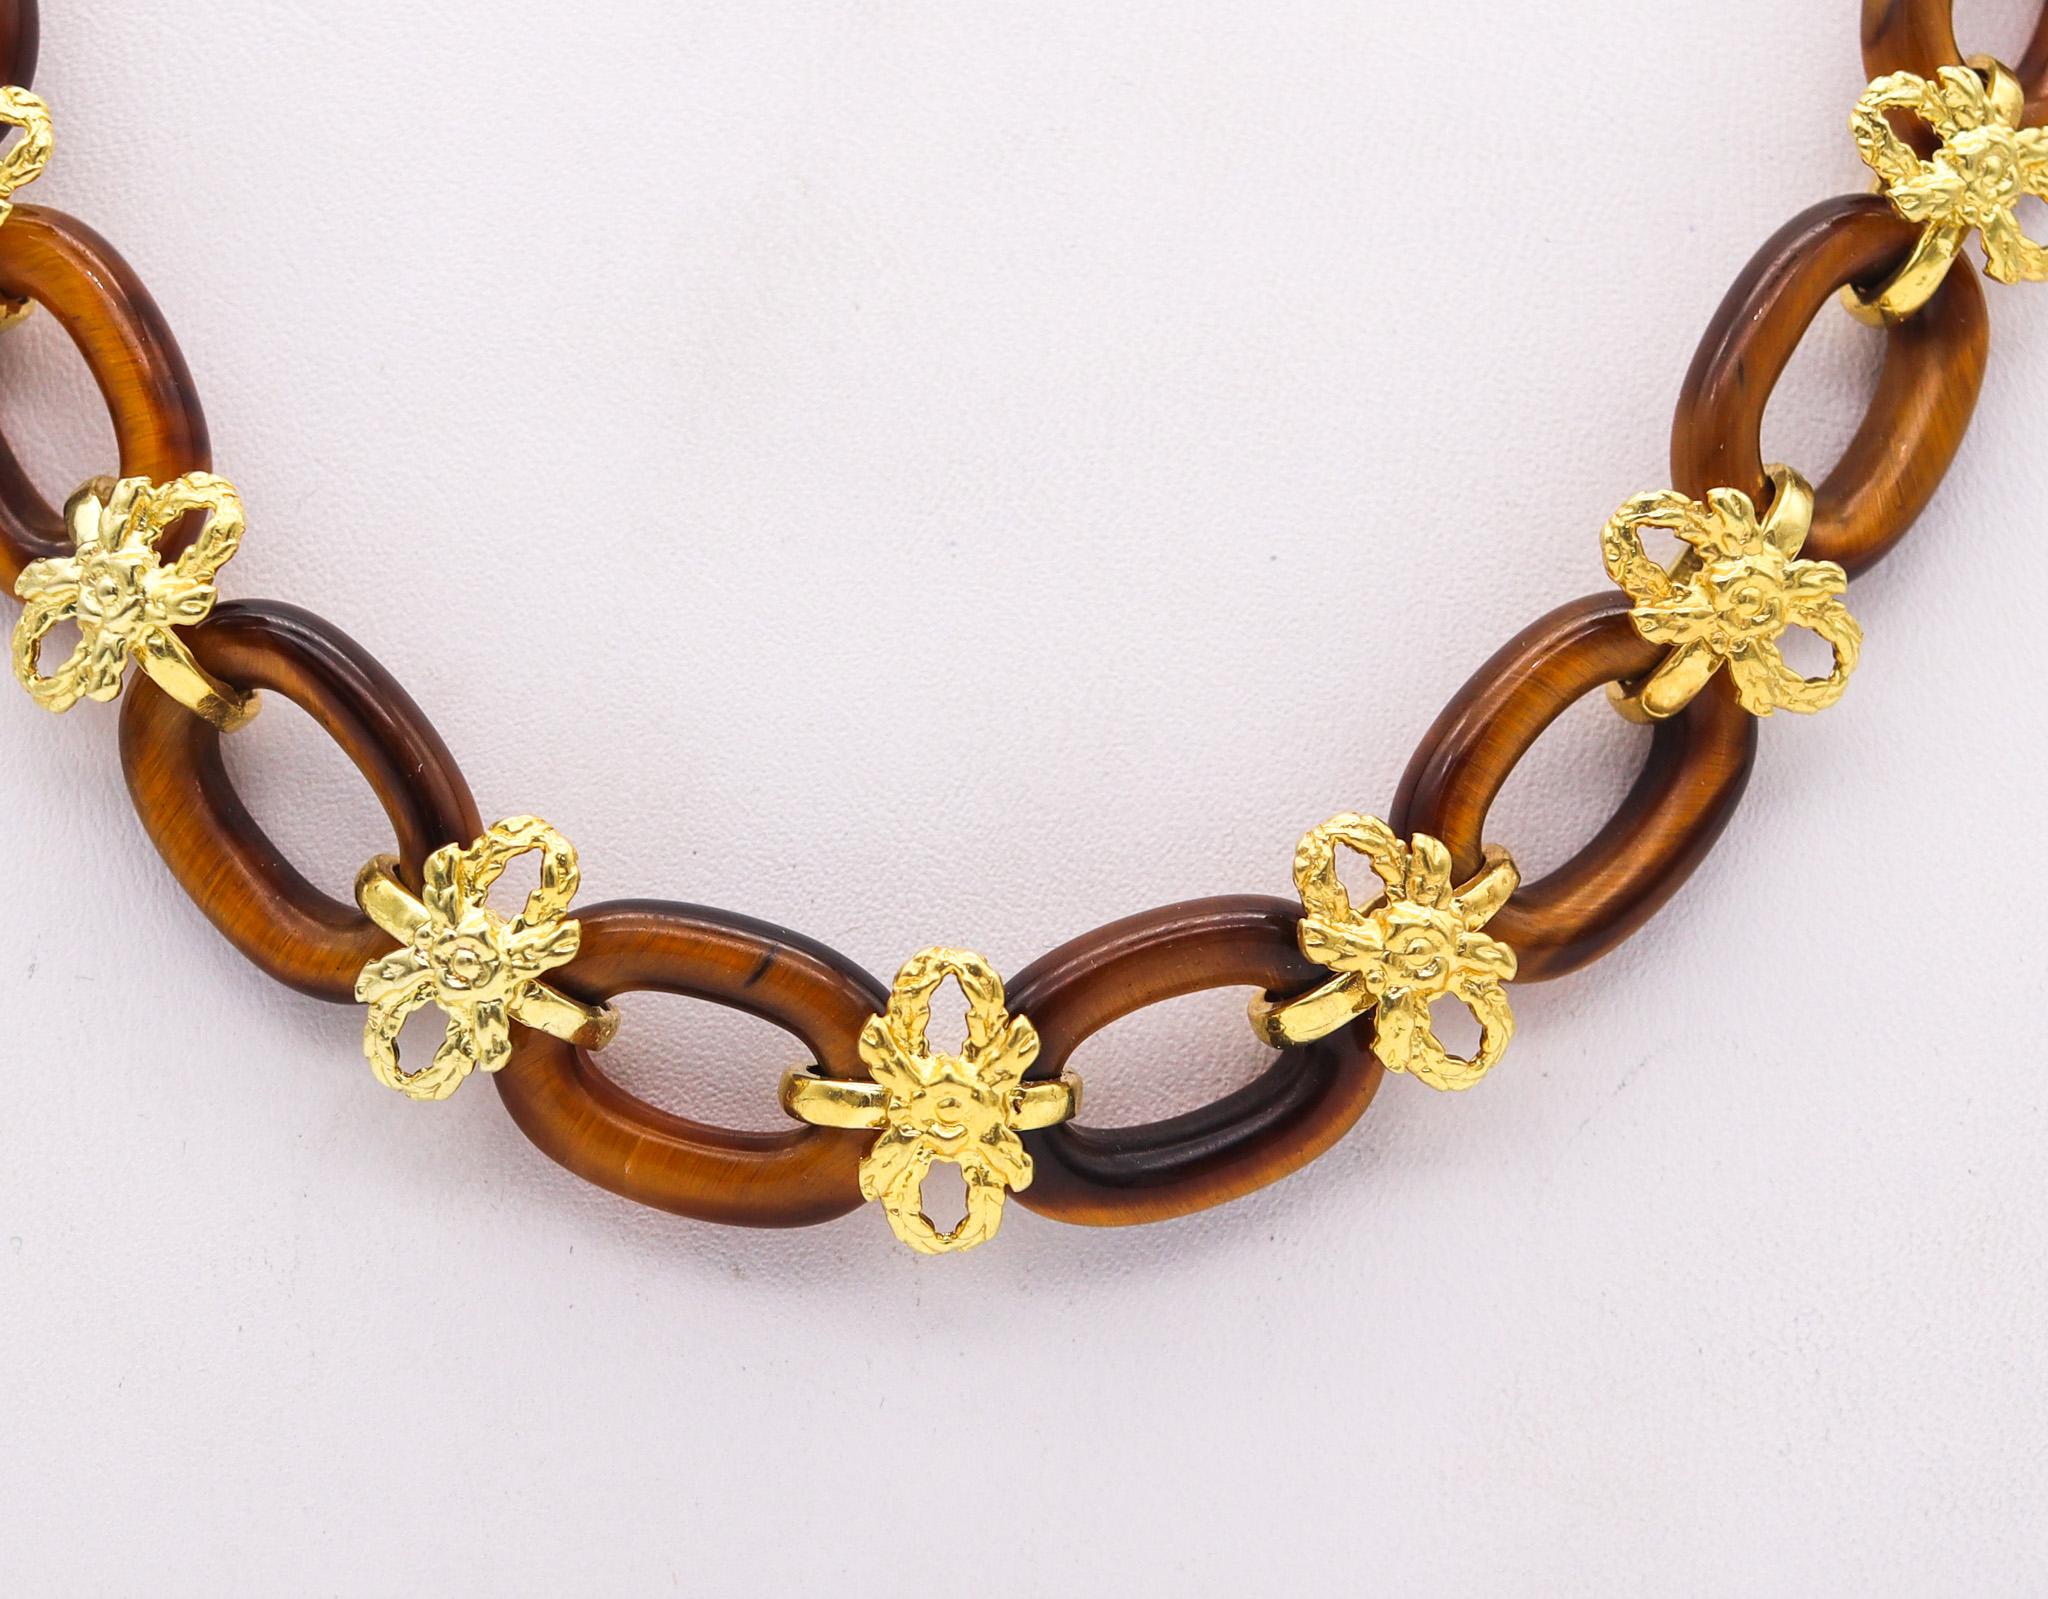 A long necklace sautoir made in Italy.

Very beautiful vintage necklace sautoir, created in Italy during the mid-century period, back in the 1960. This modernist necklace has been crafted with multiples textured links made up in 14 karats yellow